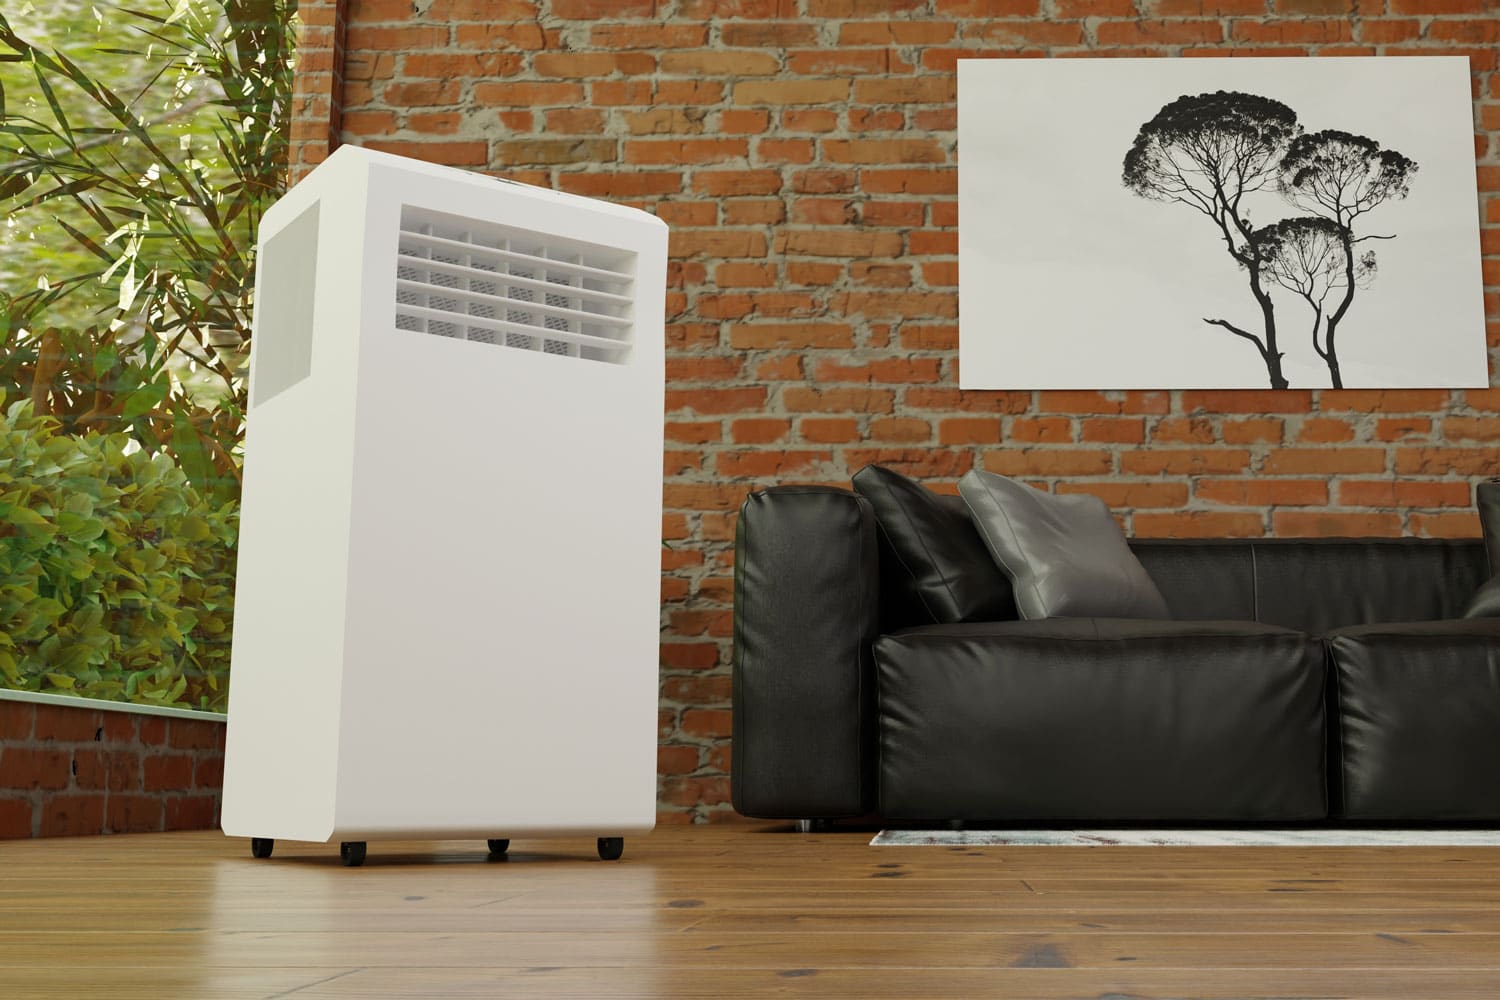 A white portable AC unit inside a brick walled living room